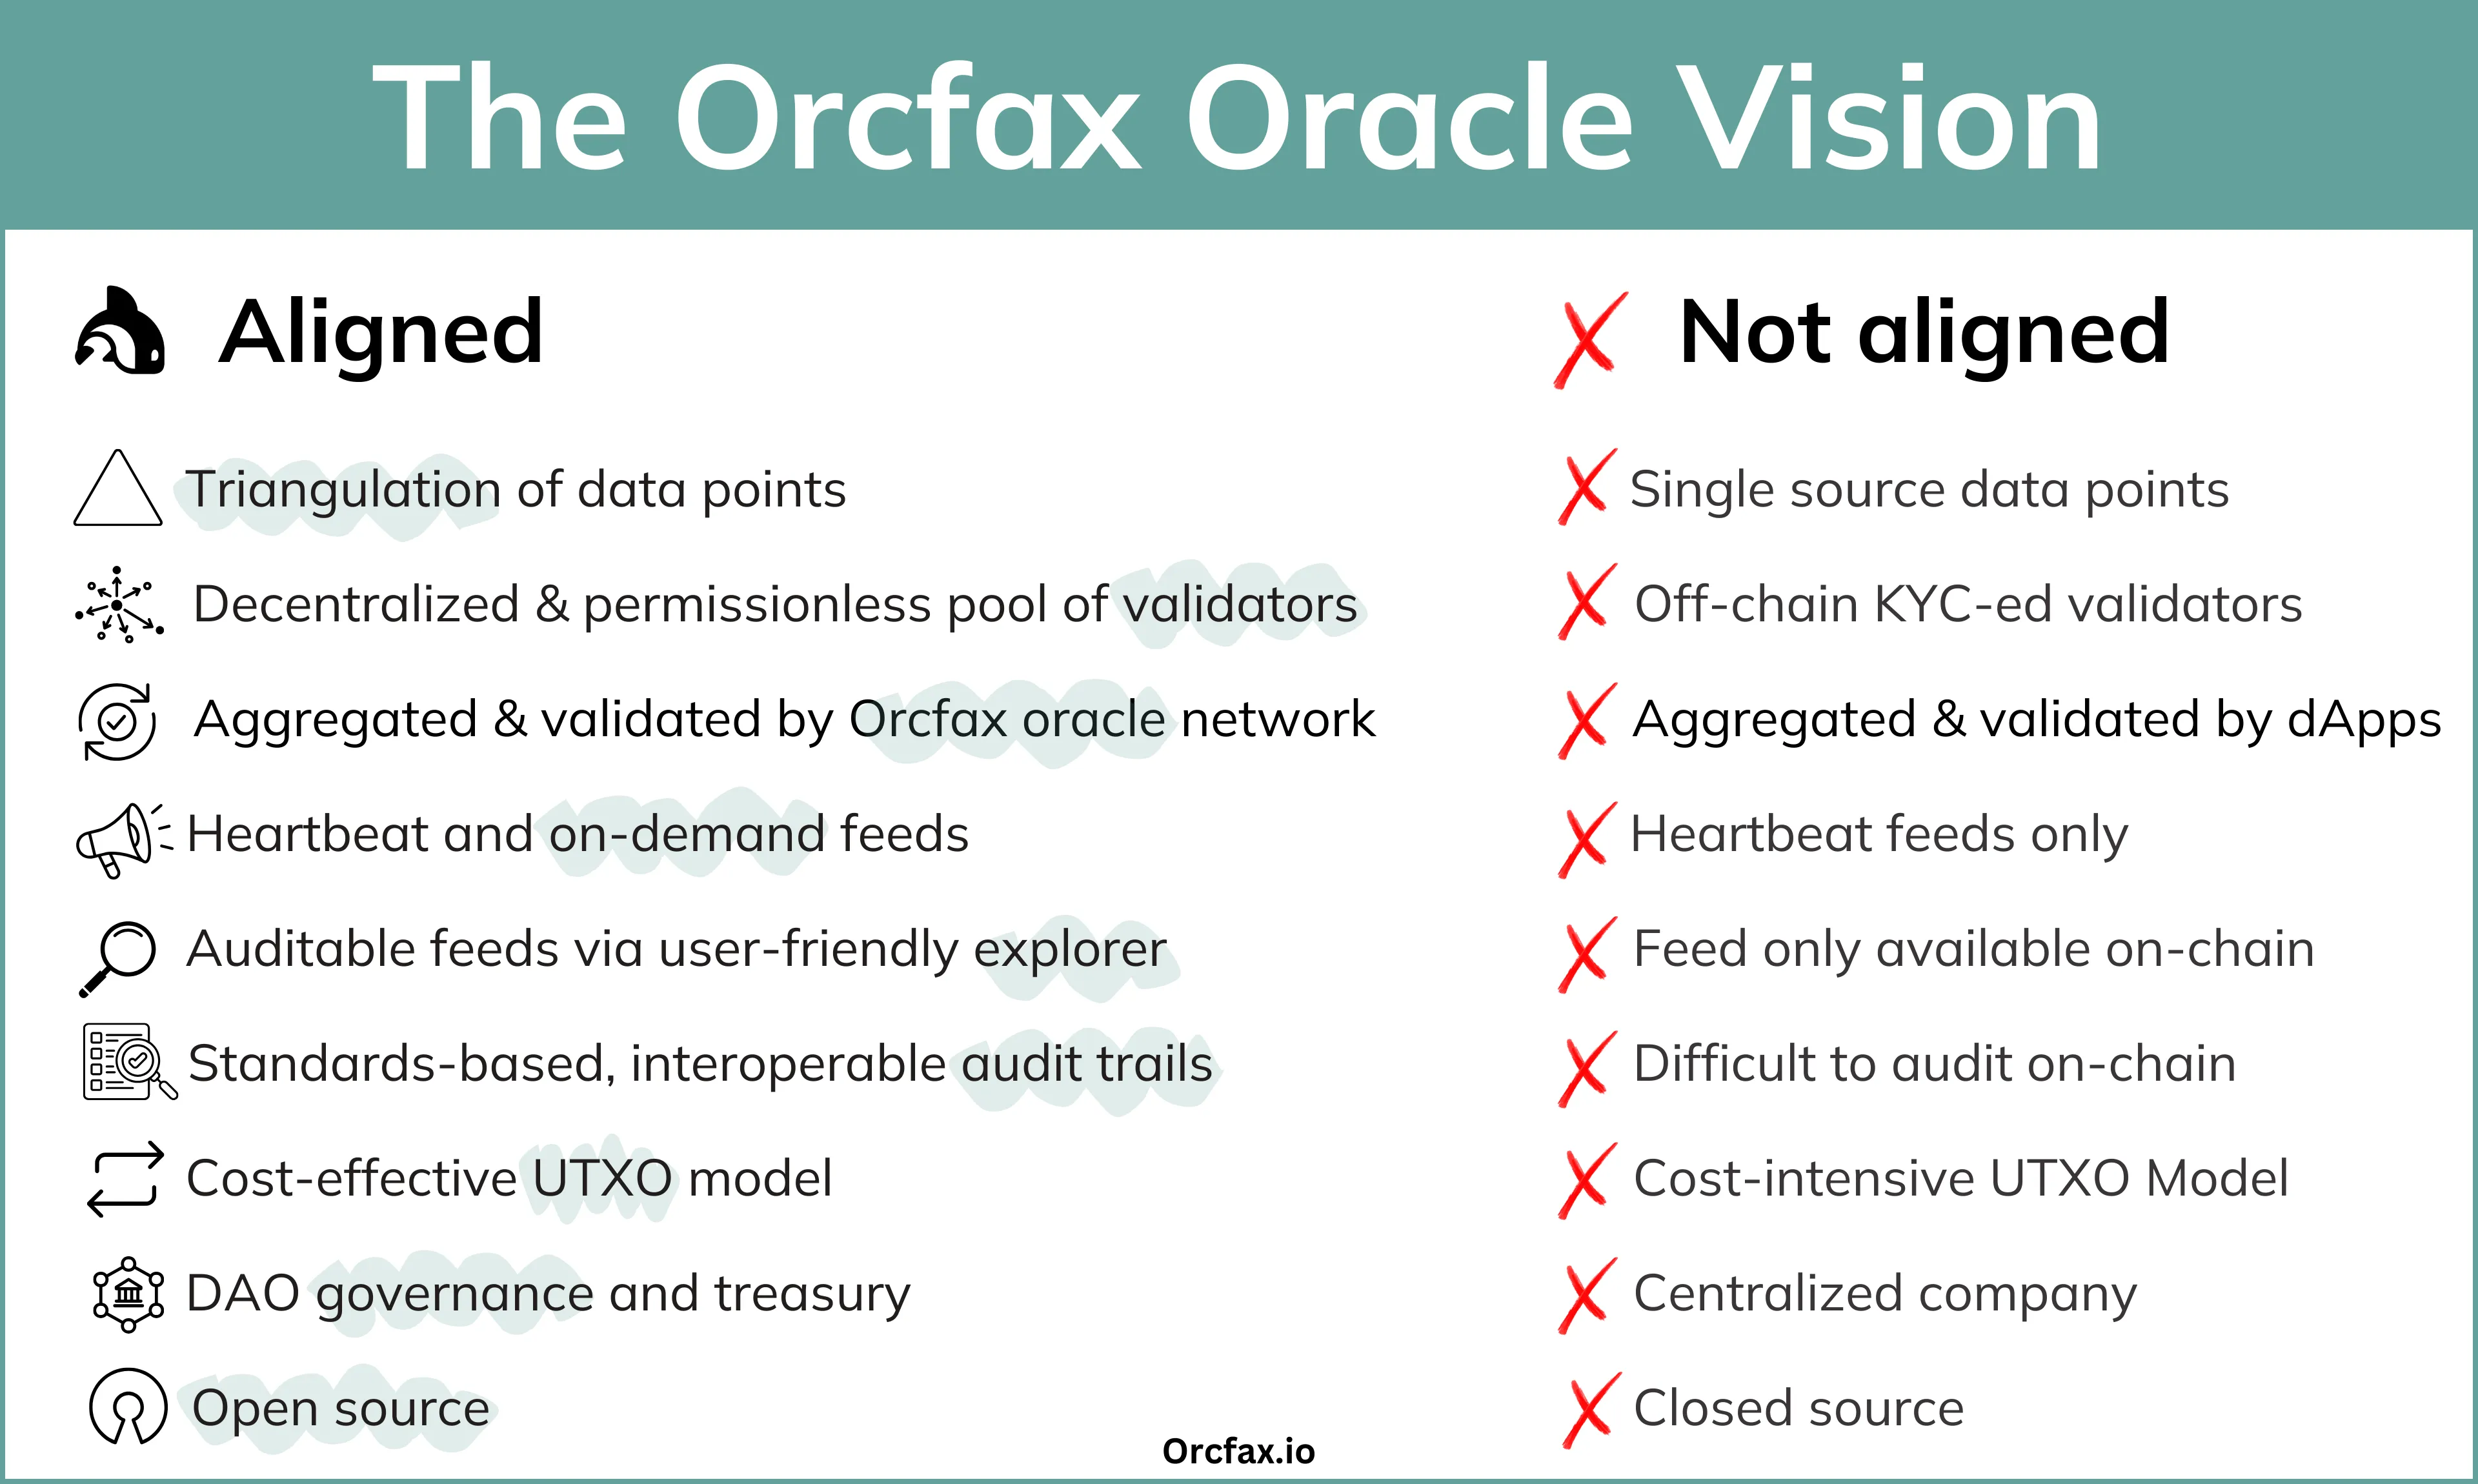 The Orcfax oracle vision